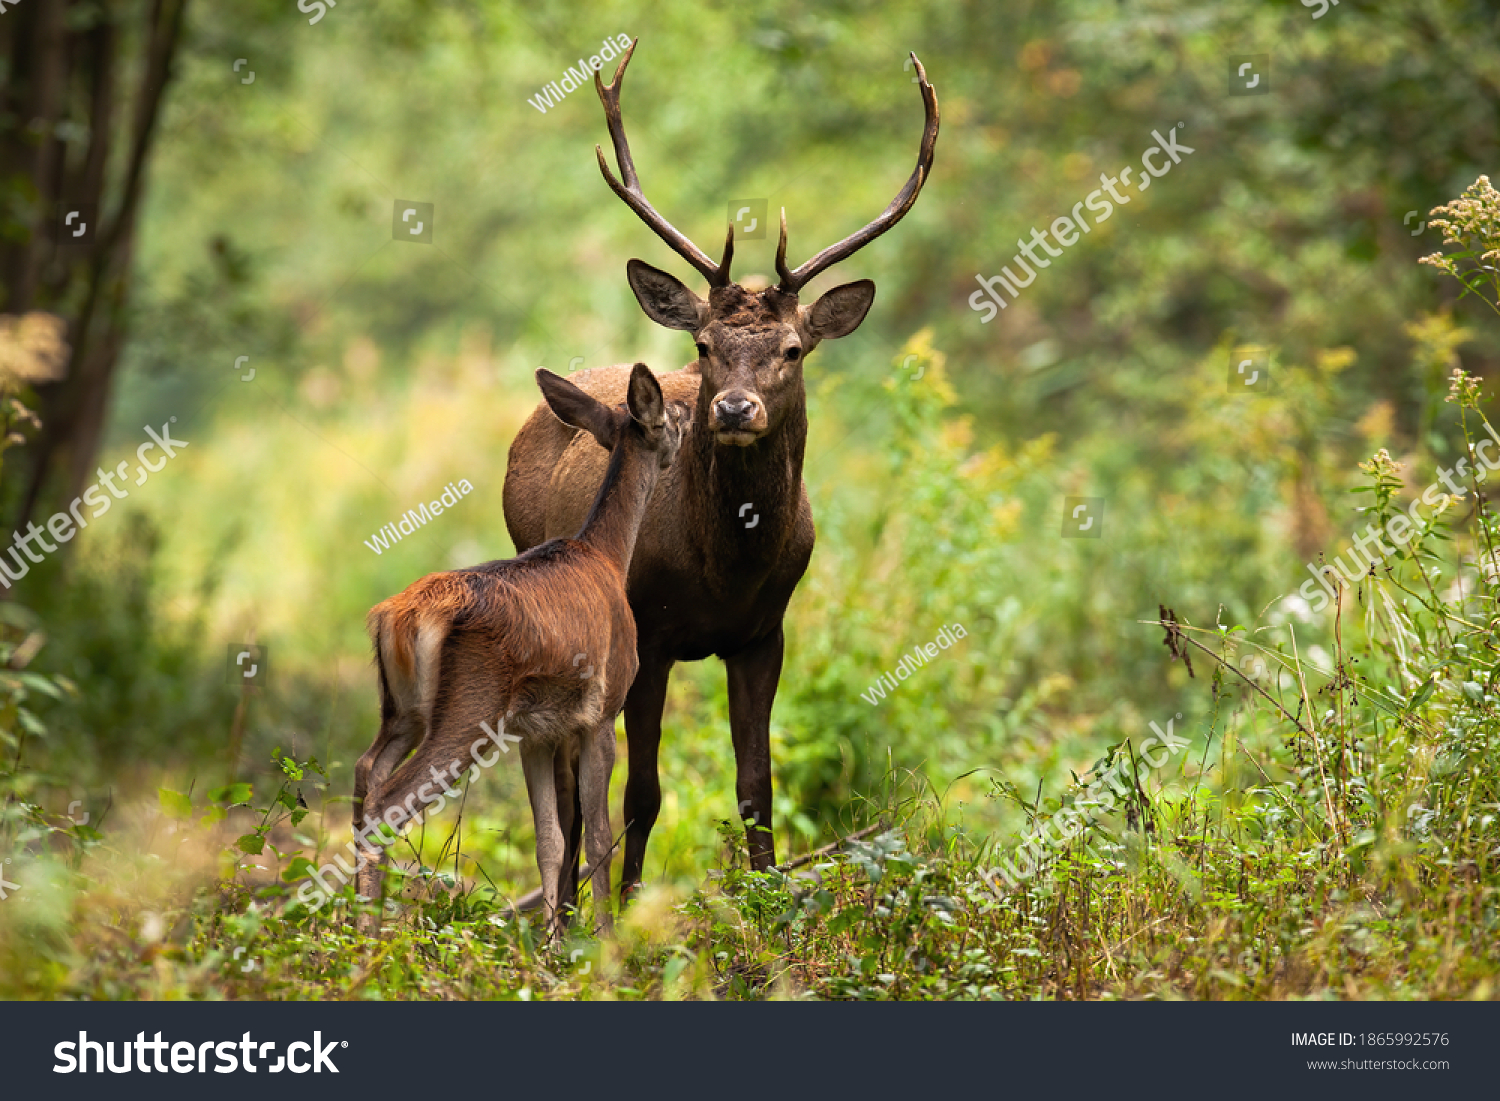 Two red deer, cervus elaphus, standing close together and touching with noses in woodland in summer nature. Wild animals couple looking to each other in forest. Stag and hind smelling in wilderness. #1865992576